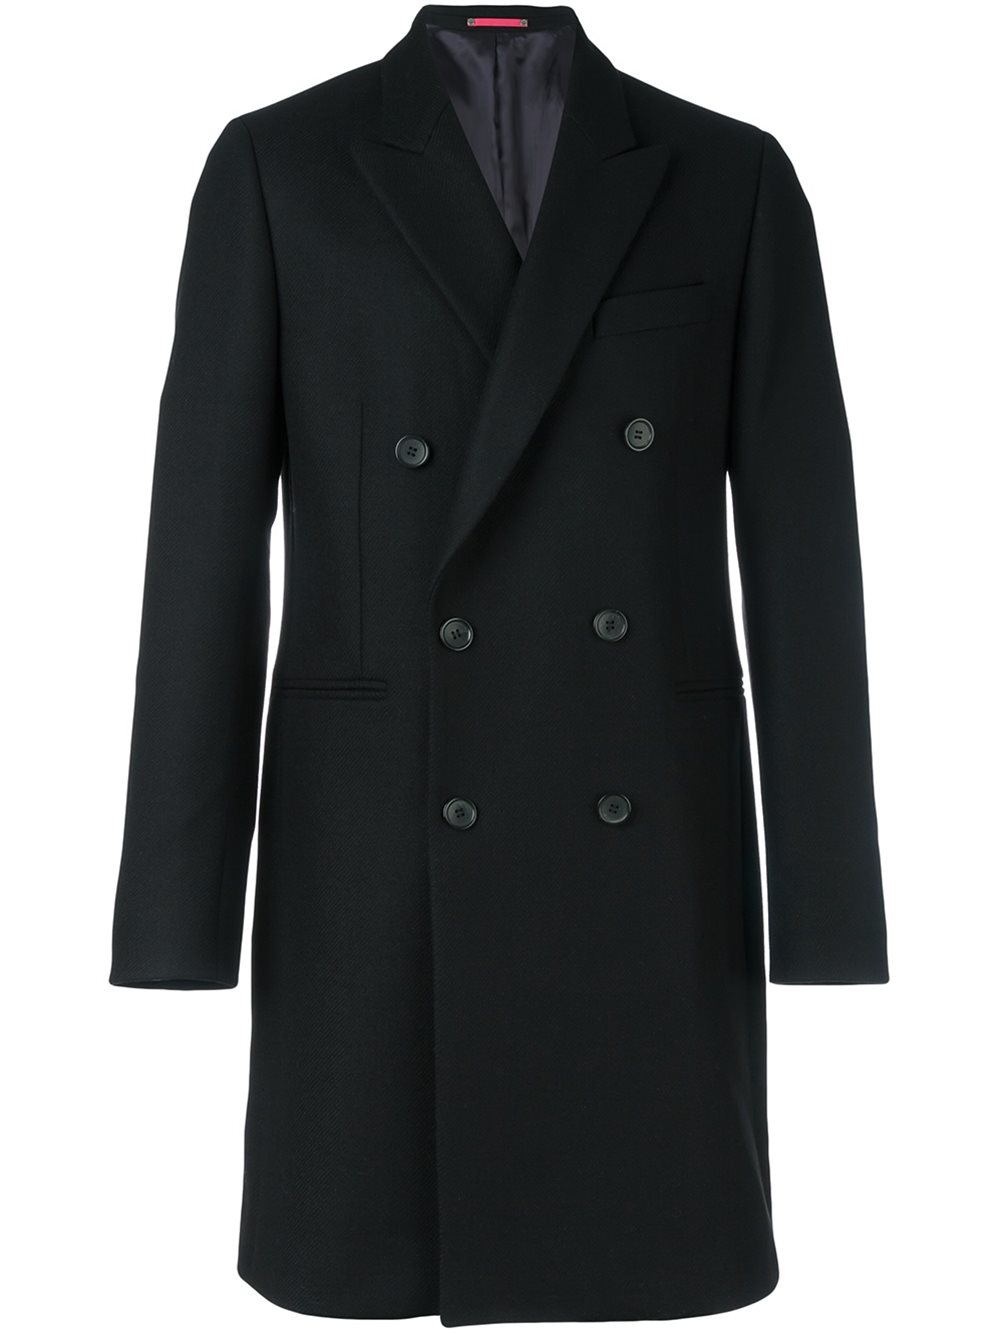 PS by Paul Smith Double Breasted Coat in Black for Men - Lyst